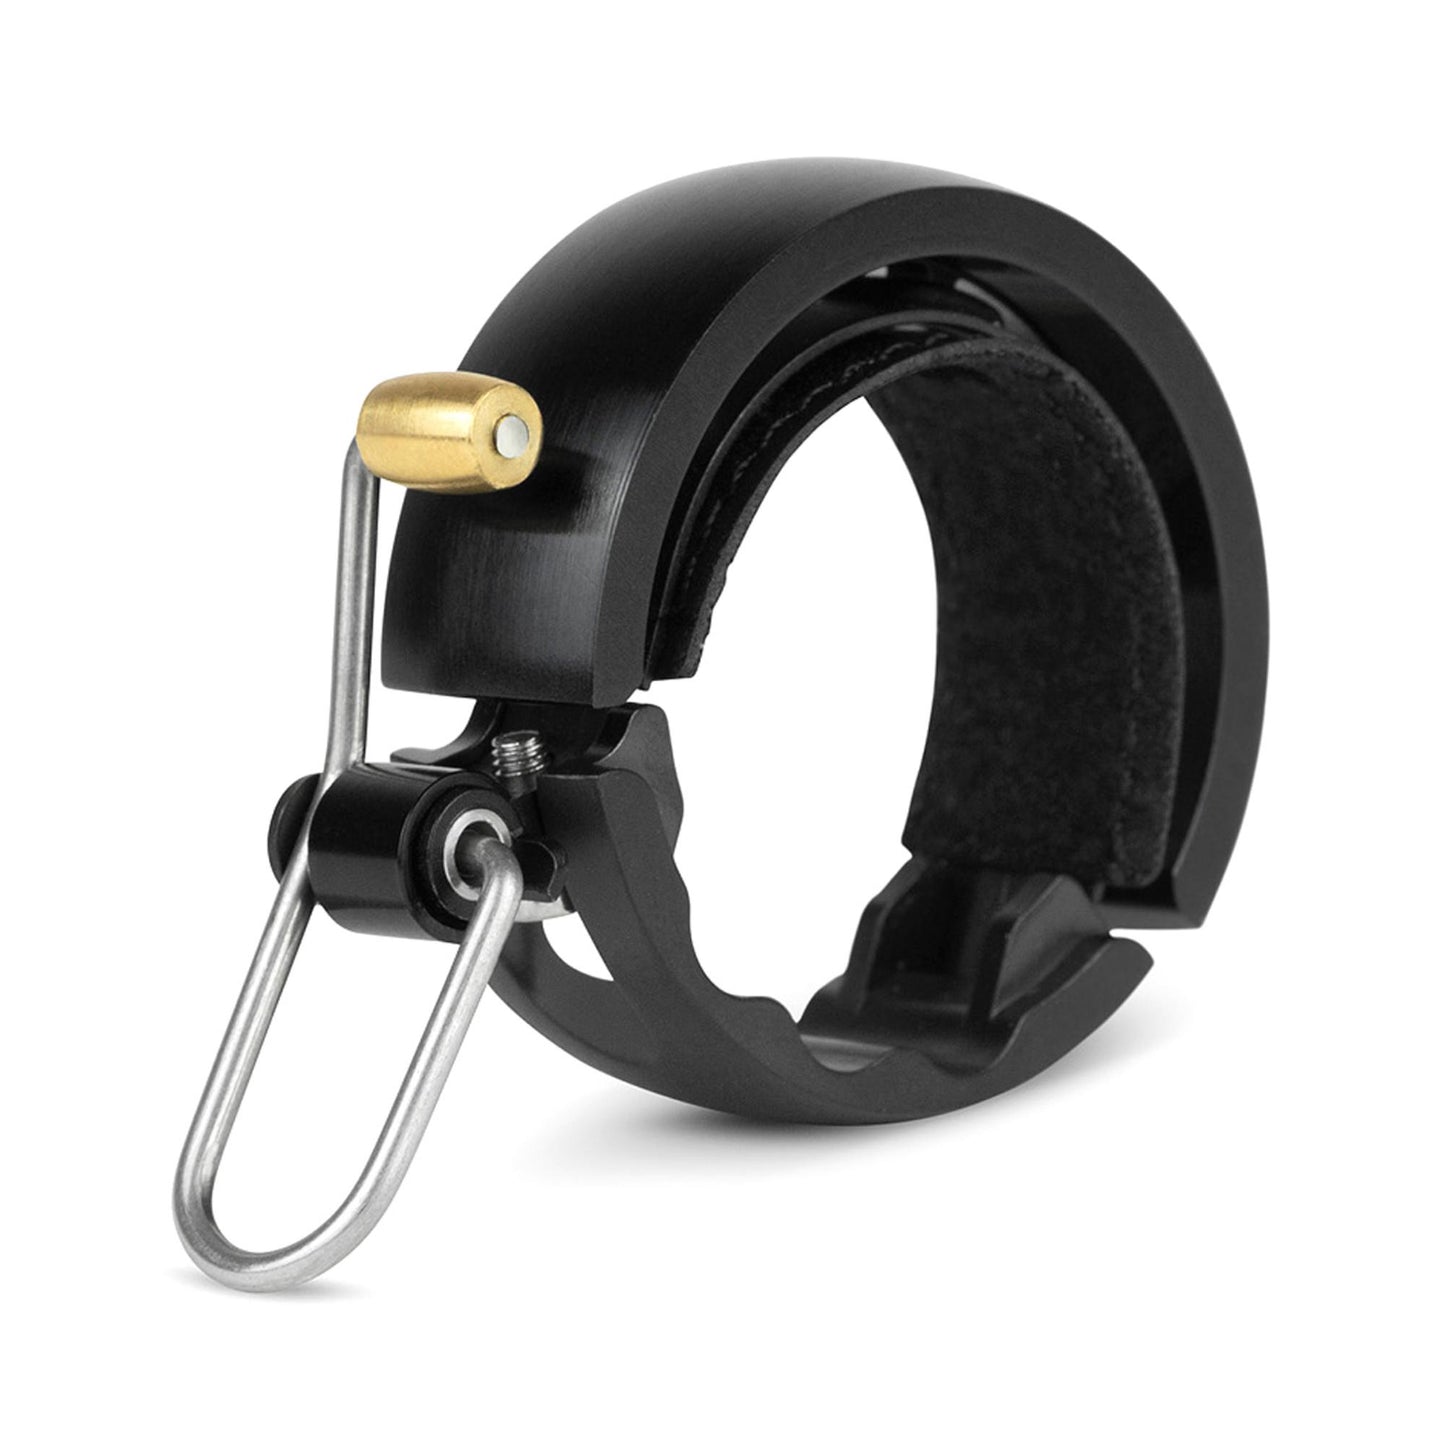 Knog Oi Luxe Bike Bell Black Large